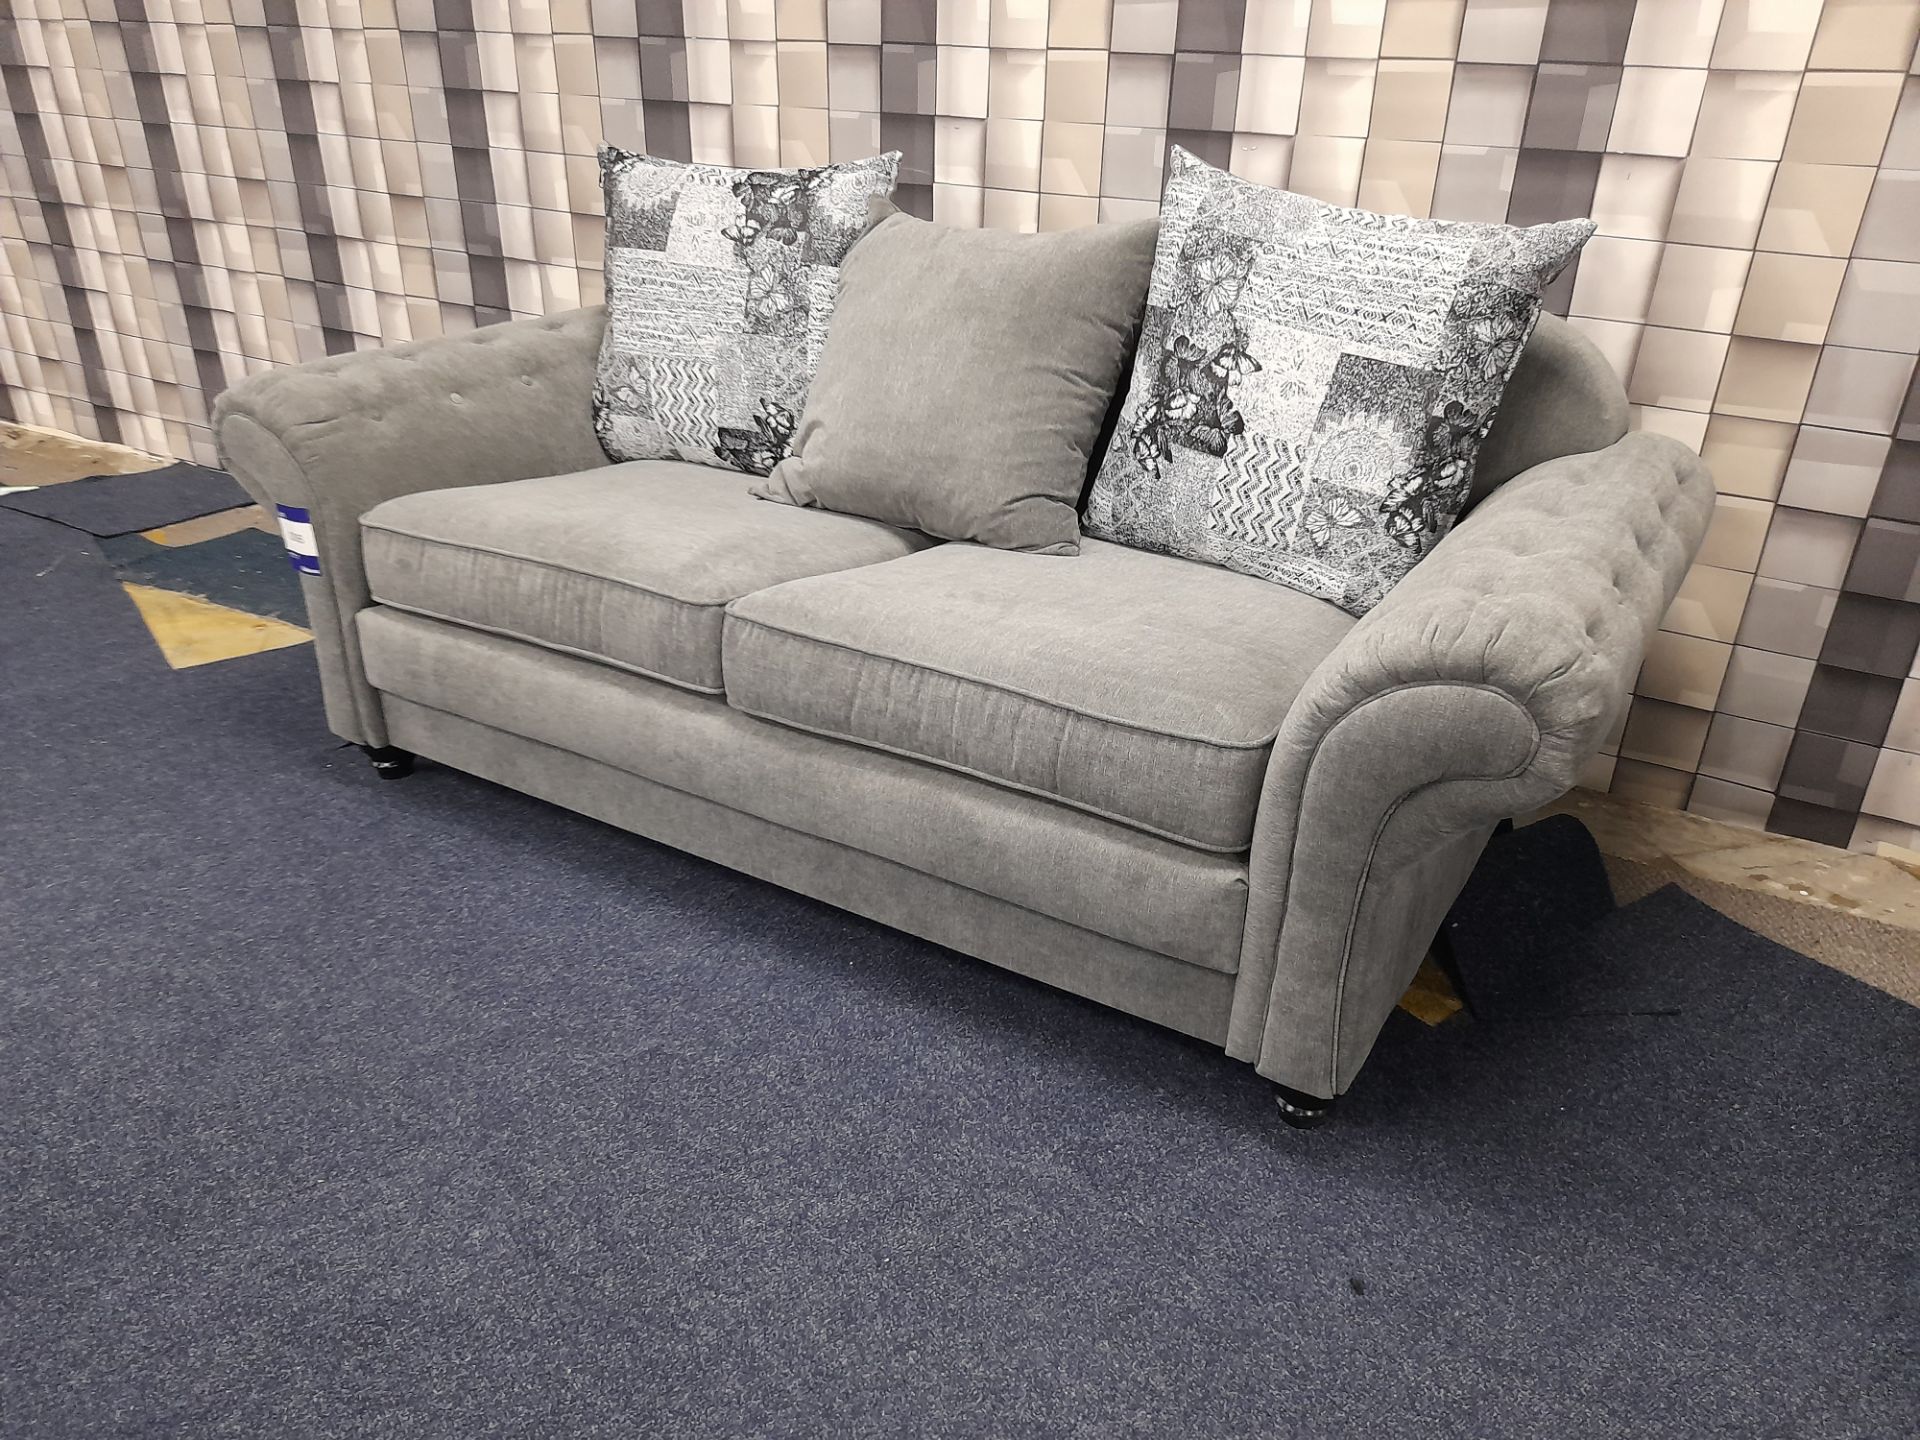 Grey fabric upholstered, 3 seater, scatter cushioned back sofa (Ex-Display) - Image 2 of 4